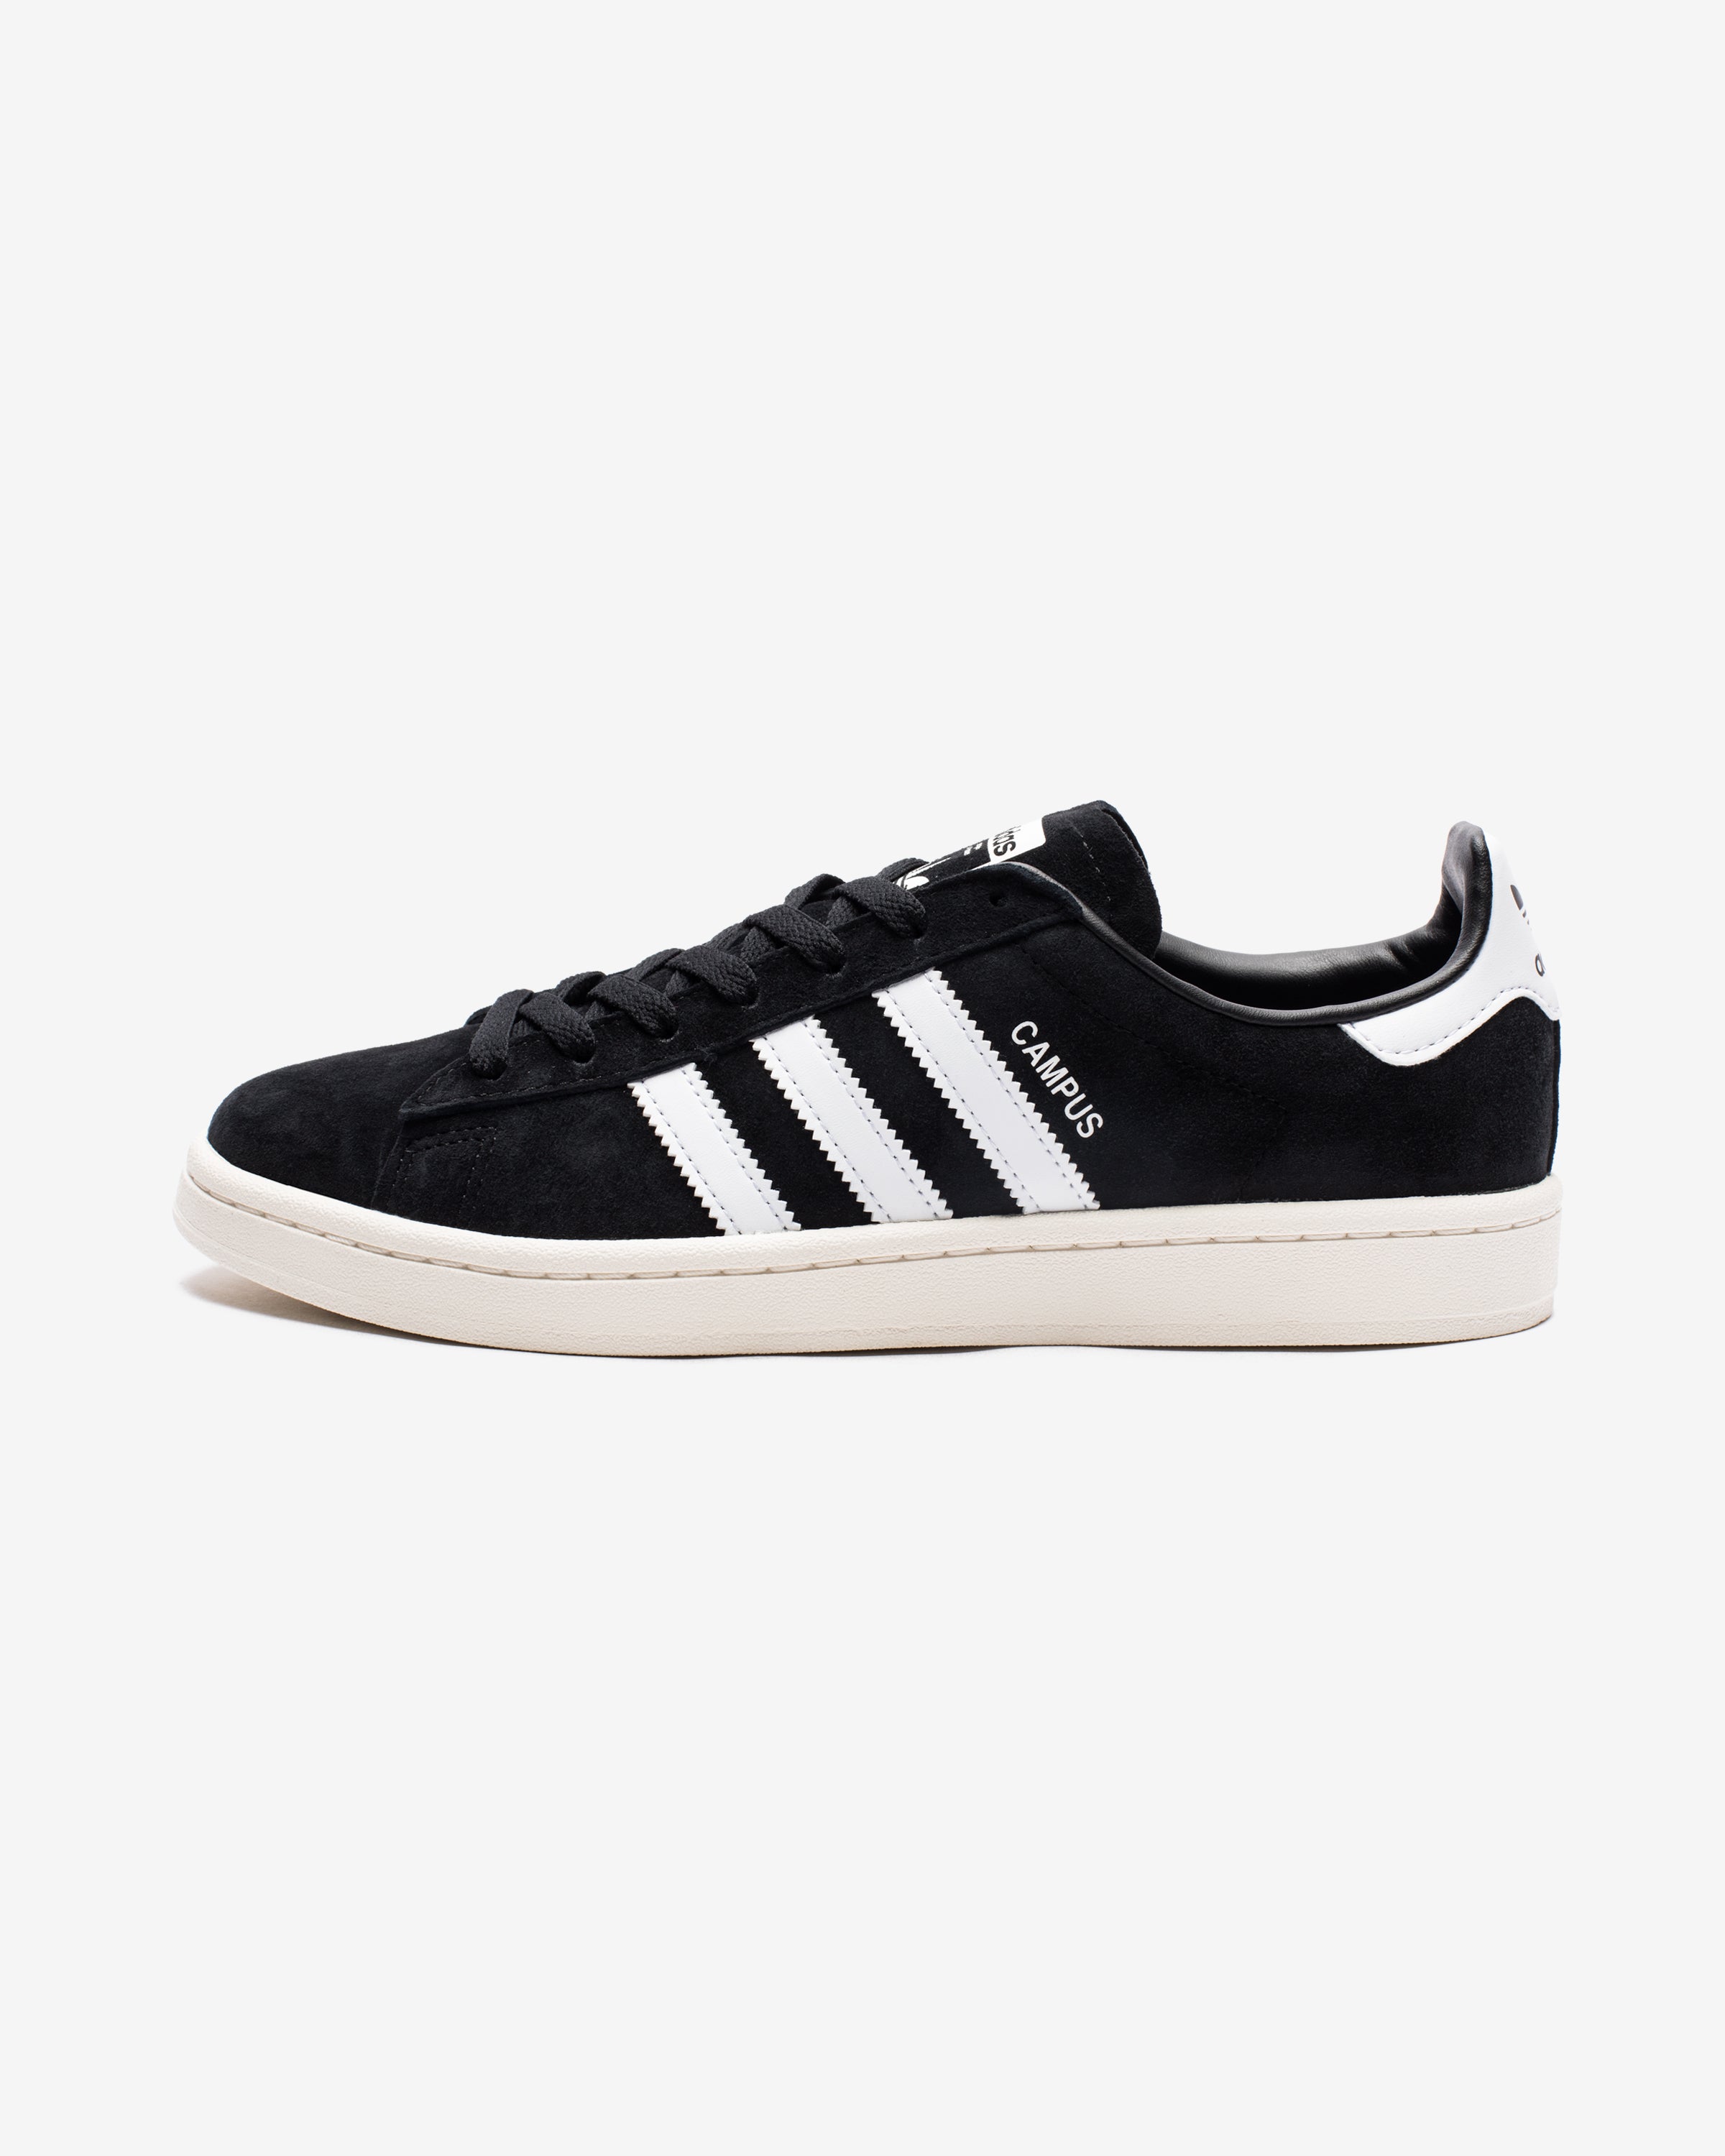 ADIDAS CAMPUS - CBLACK/ FTWWHT/ CWHITE – Undefeated | Sneaker low